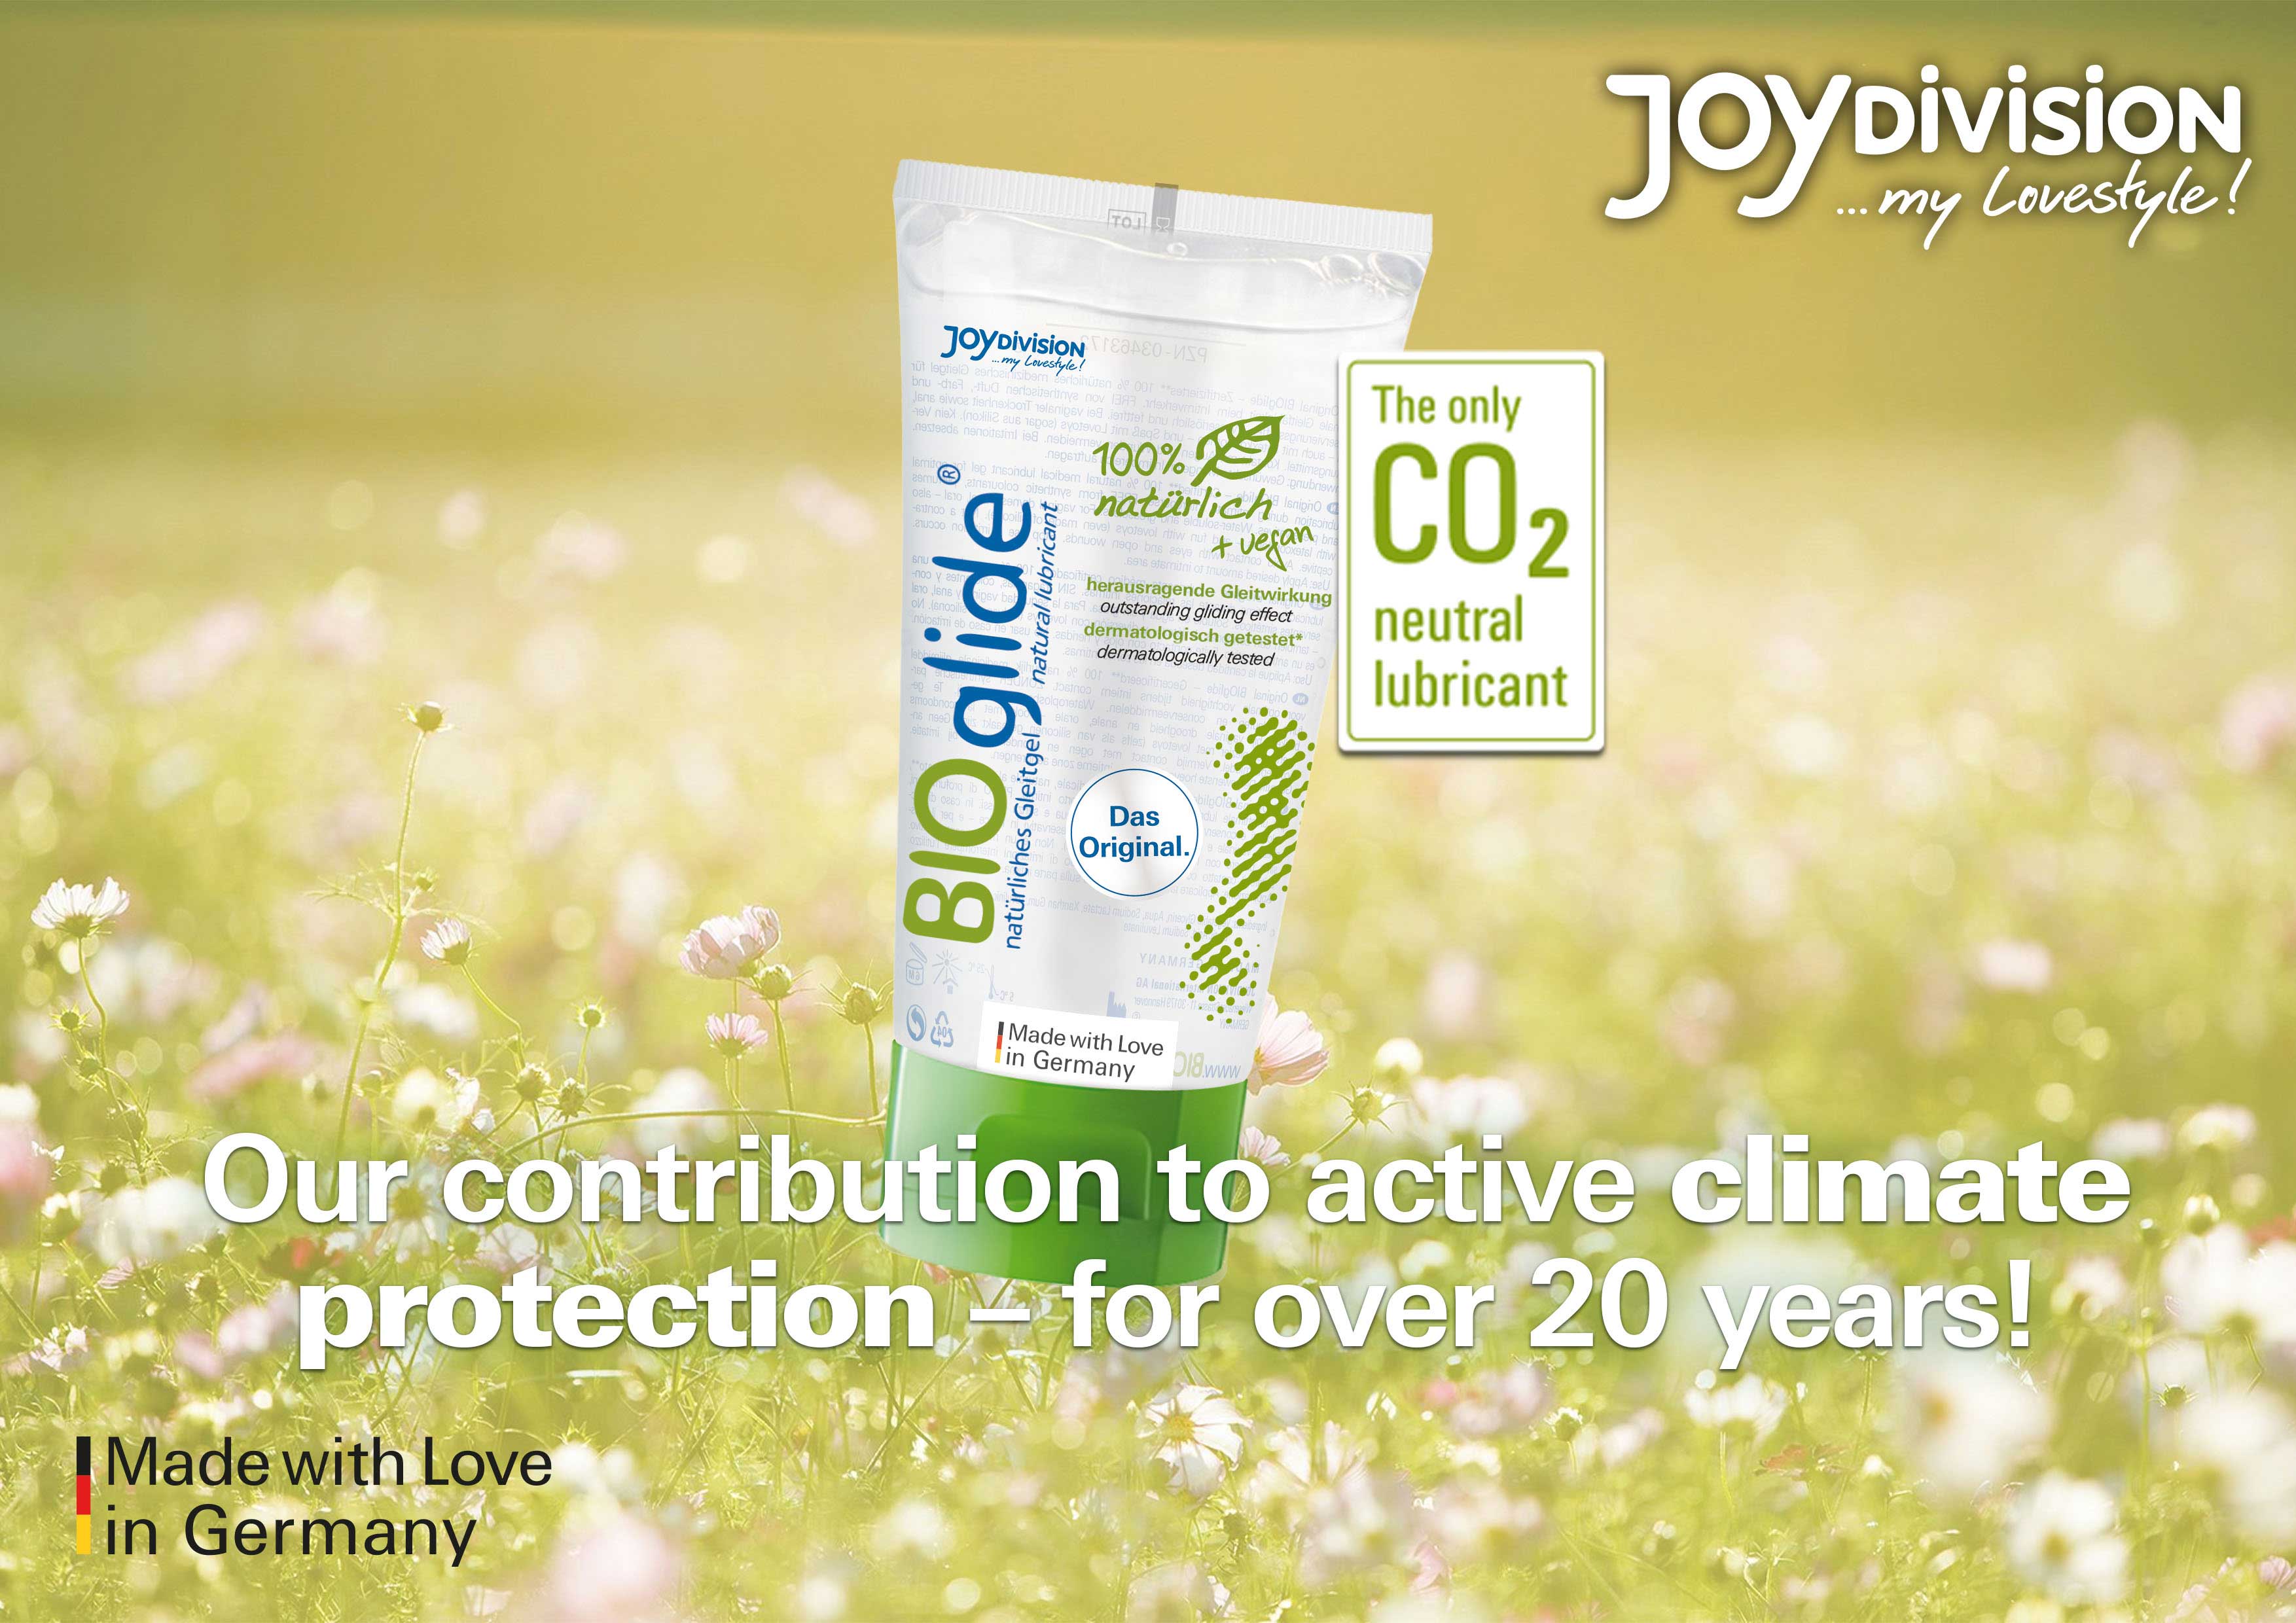 BIOglide lubricant climate protection: Our contribution to activate climate protection - for over 20 years!